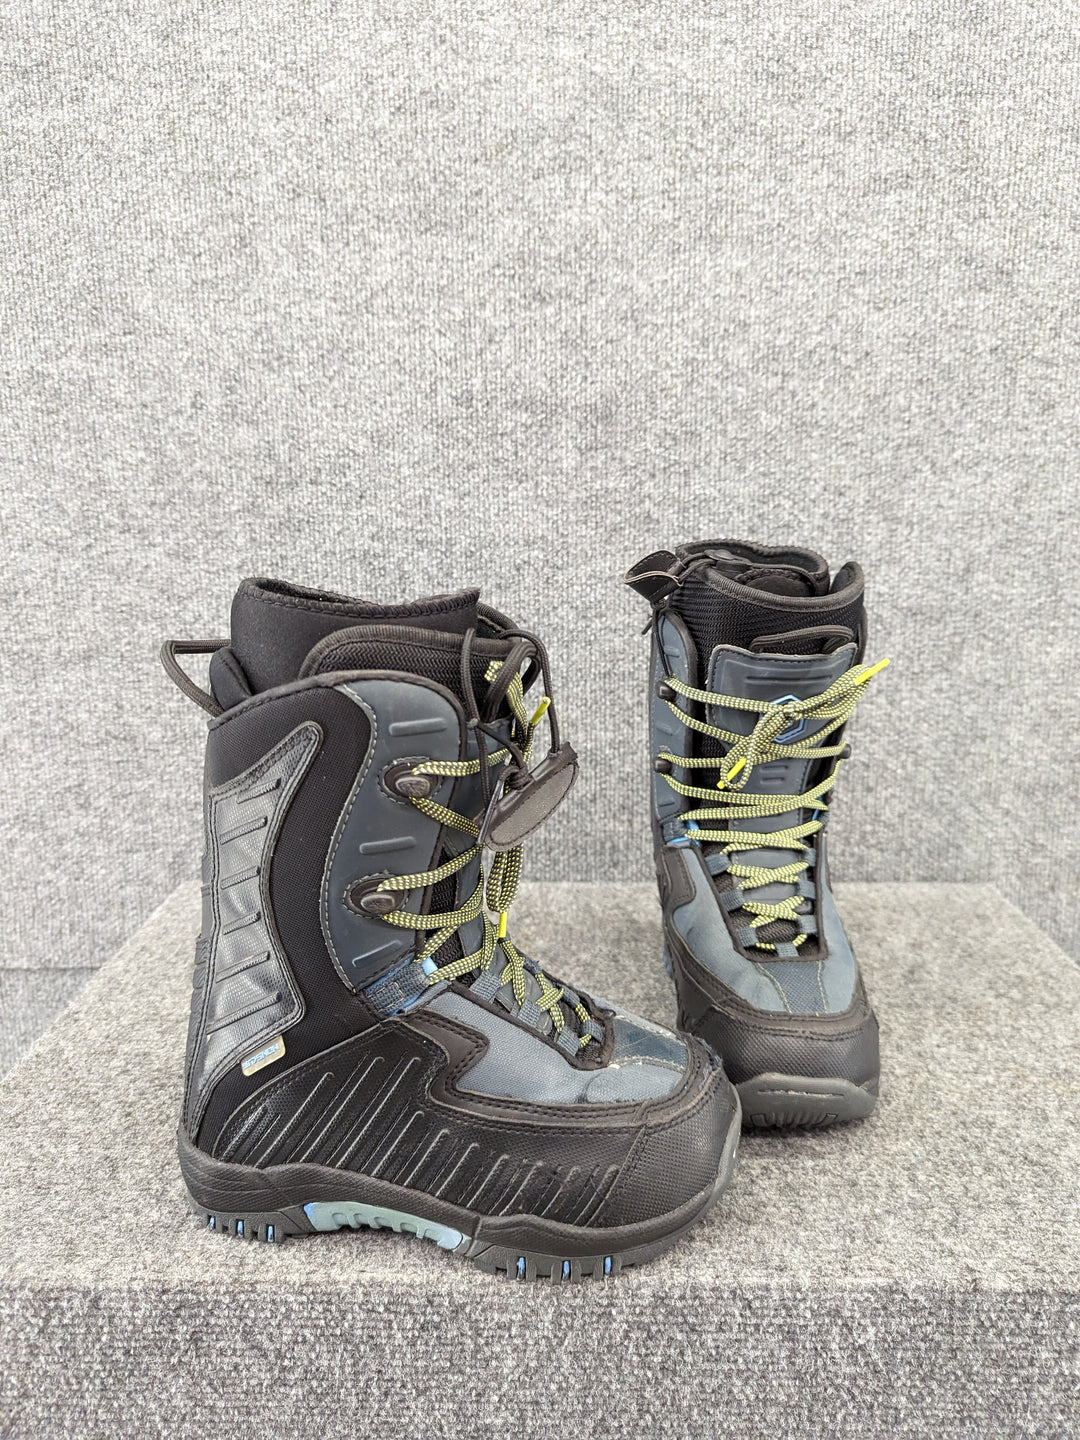 LTD Size 4/35 Youth Snowboard Boots